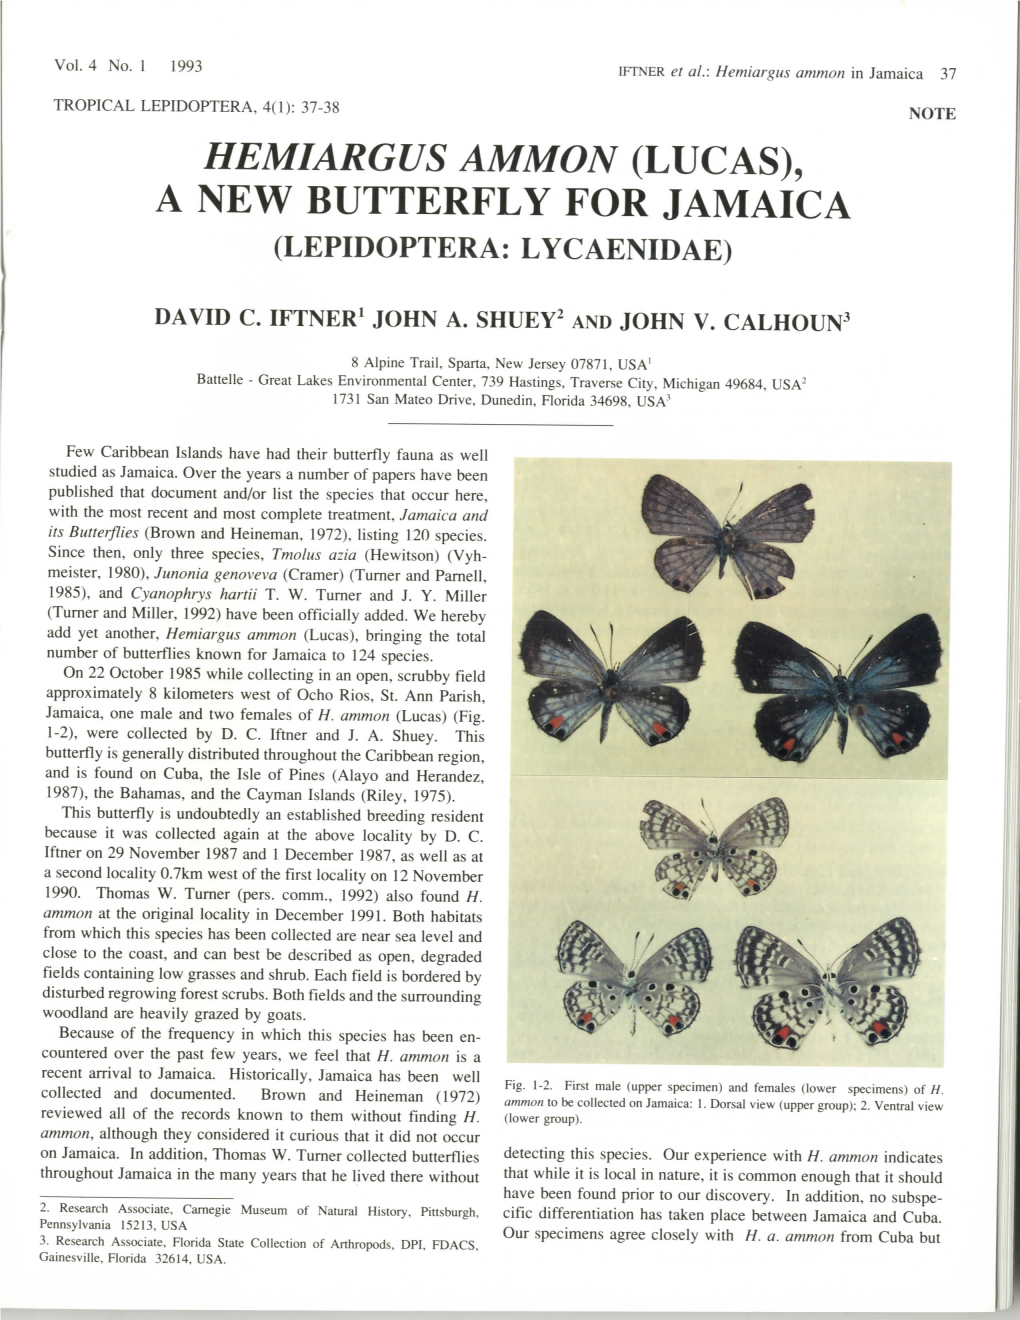 A New Butterfly for Jamaica (Lepidoptera: Lycaenidae)